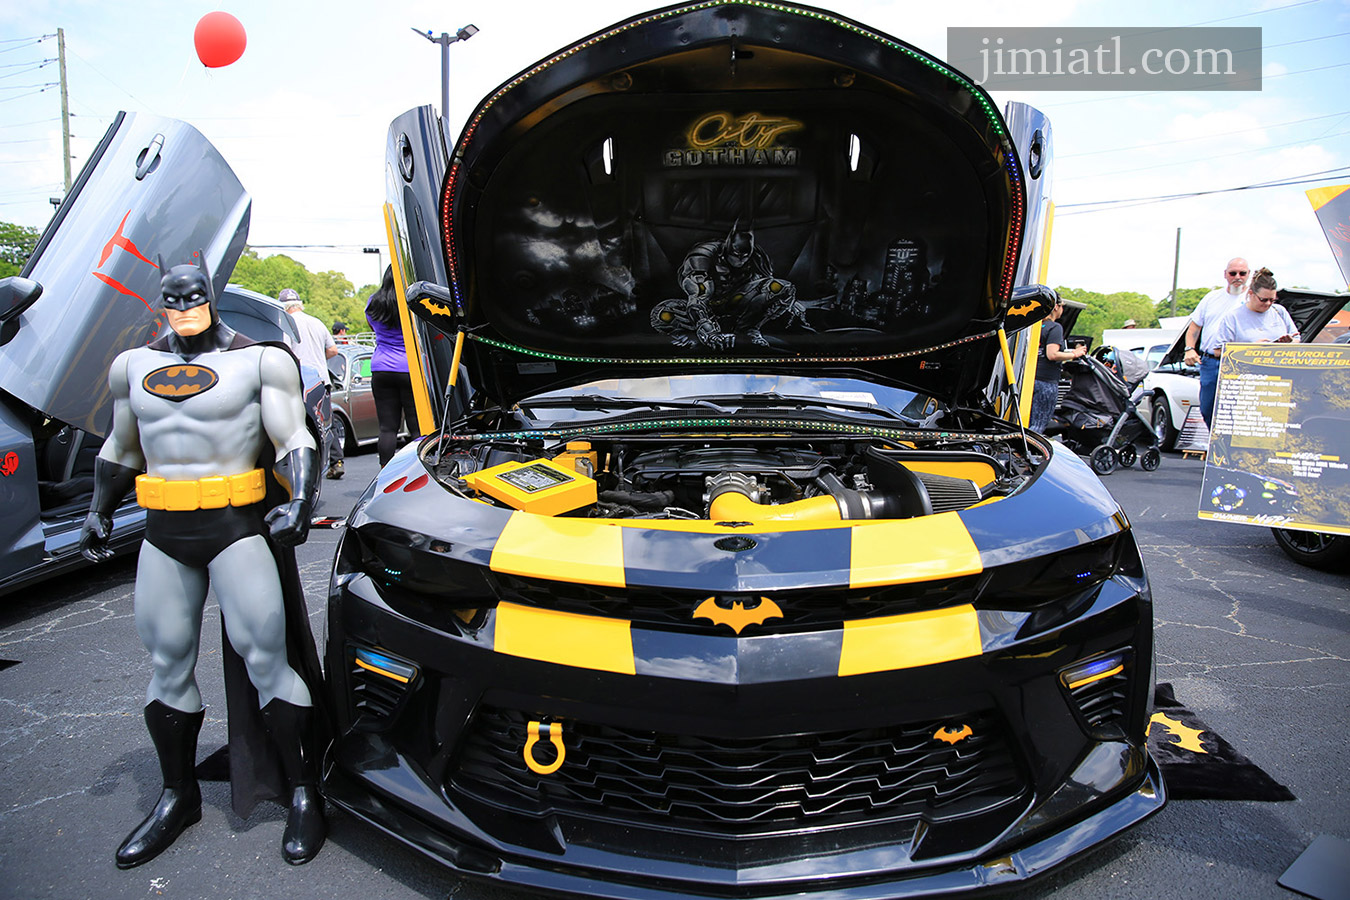 Chevy Camaro with Batman Theme in style at car show downtown Lawrenceville